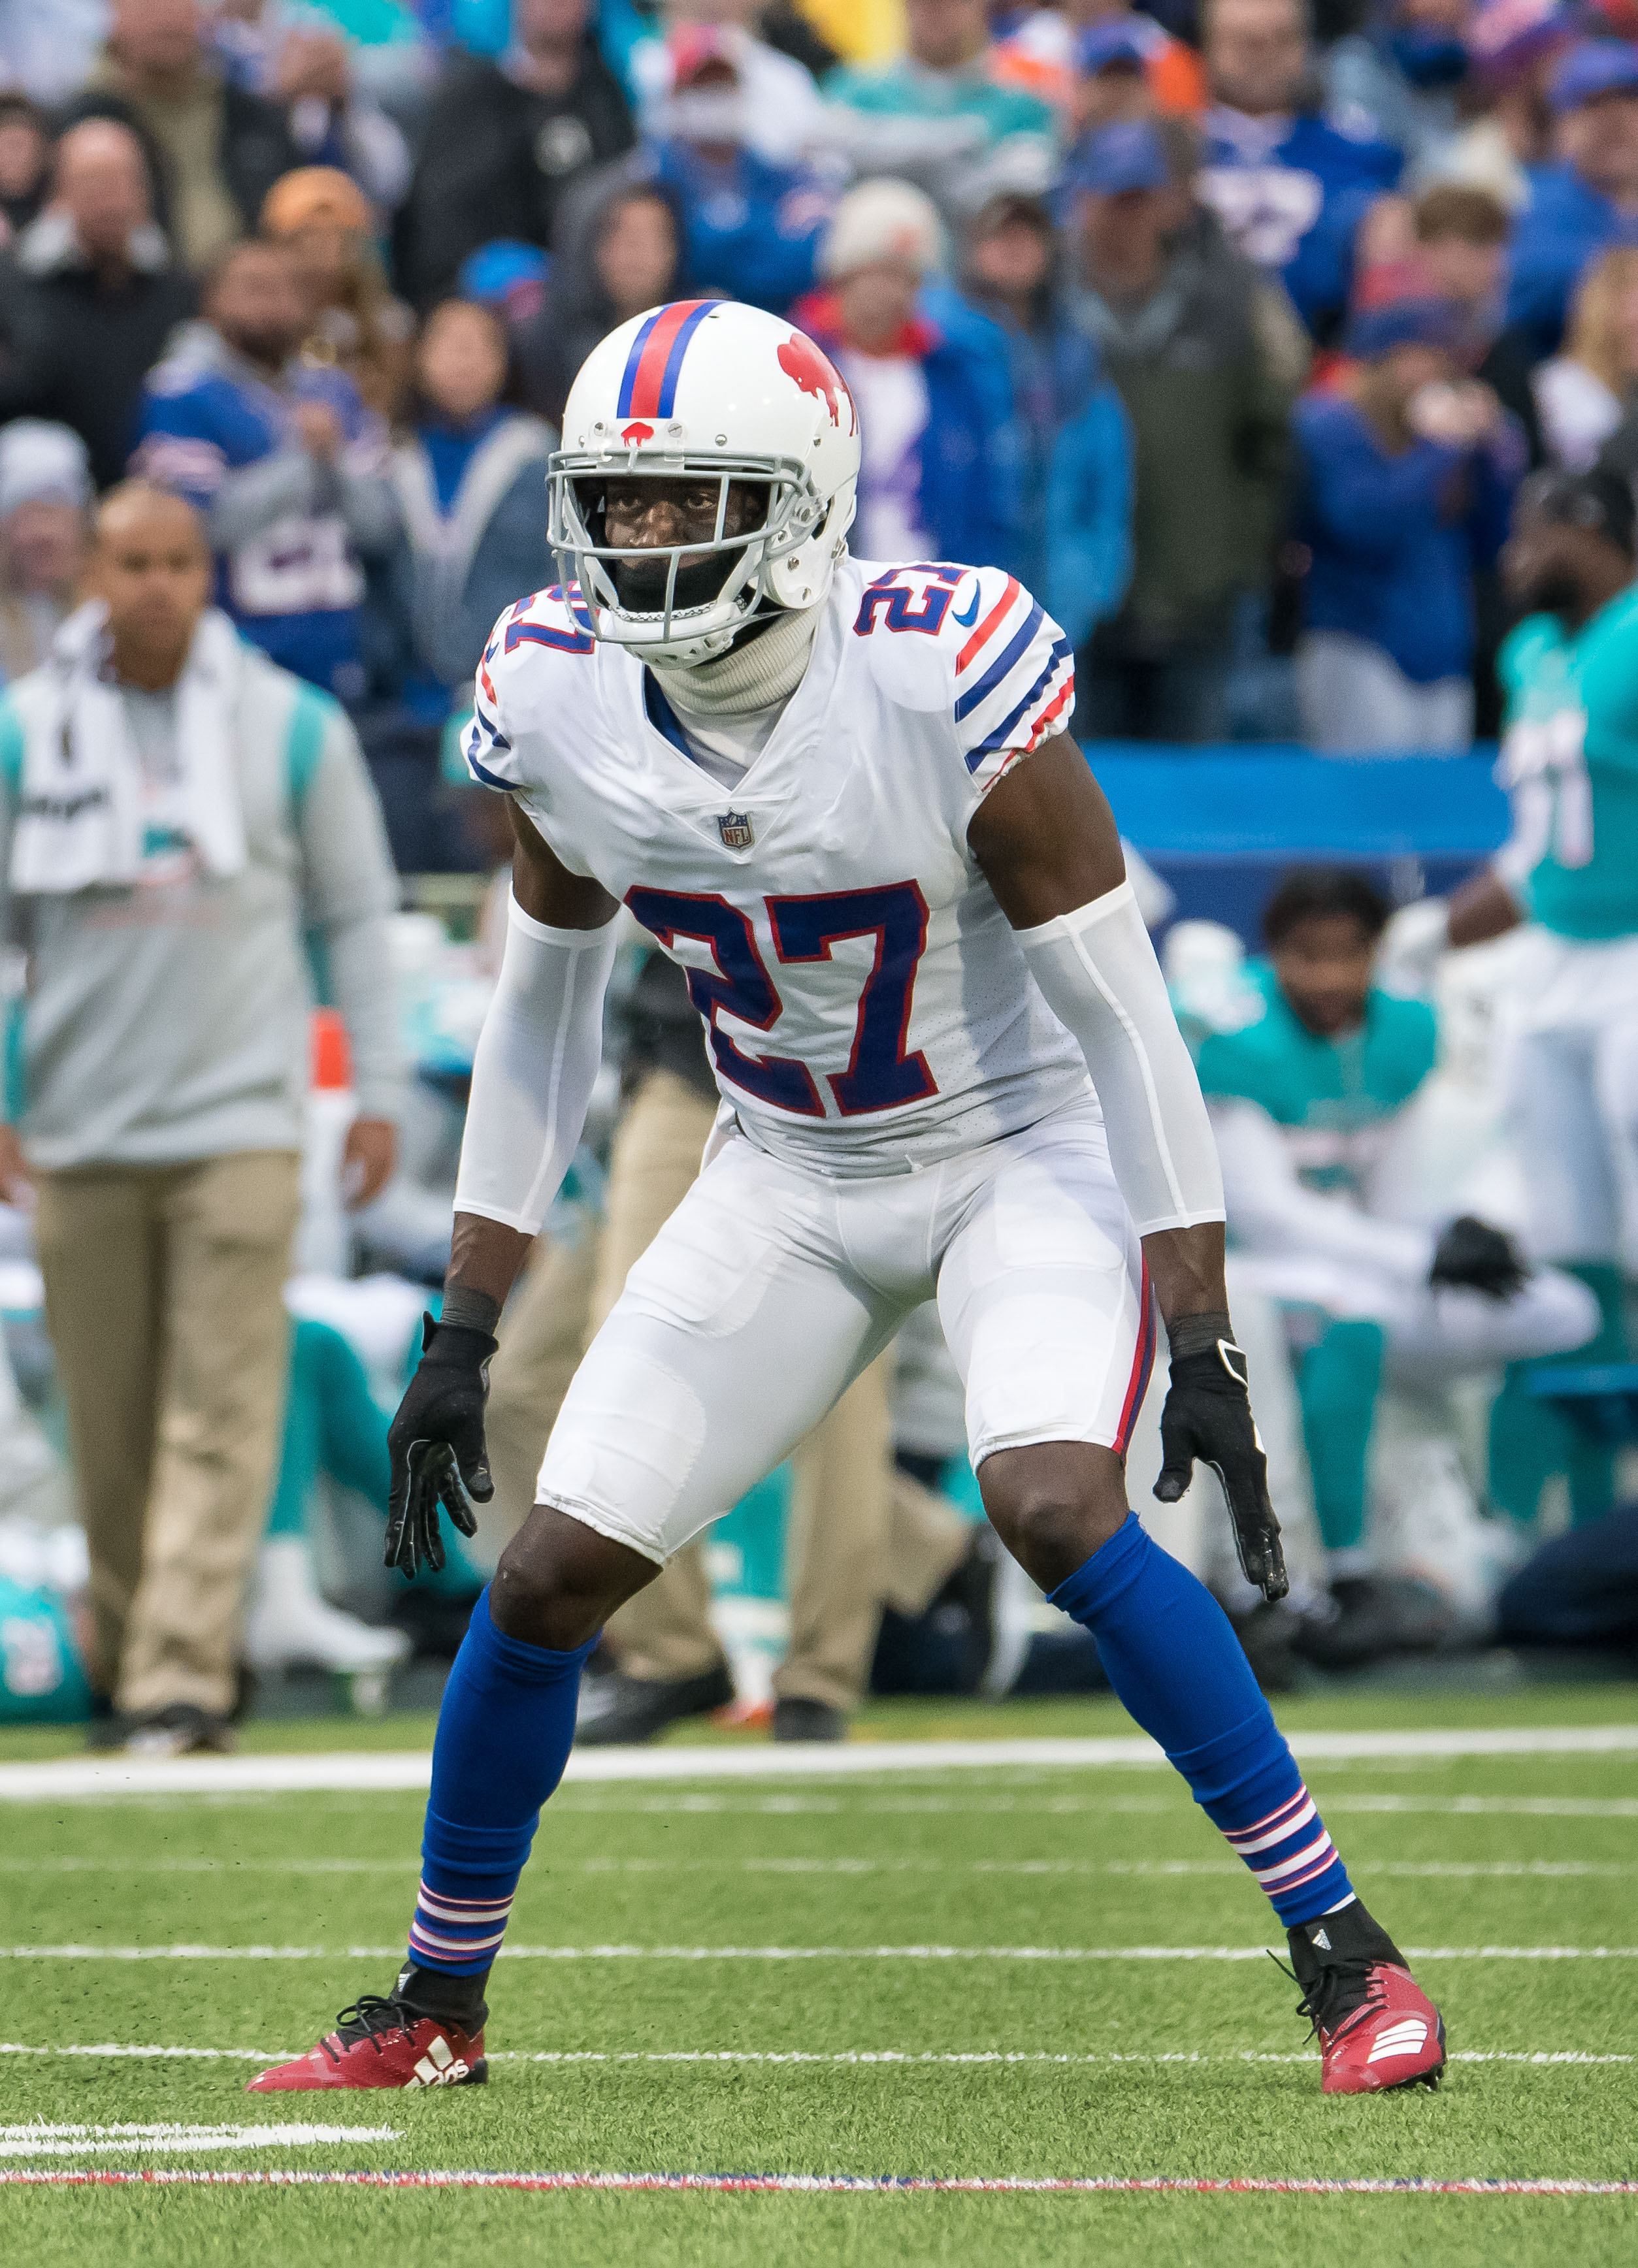 Should the Buffalo Bills move Tre'Davious White to safety?